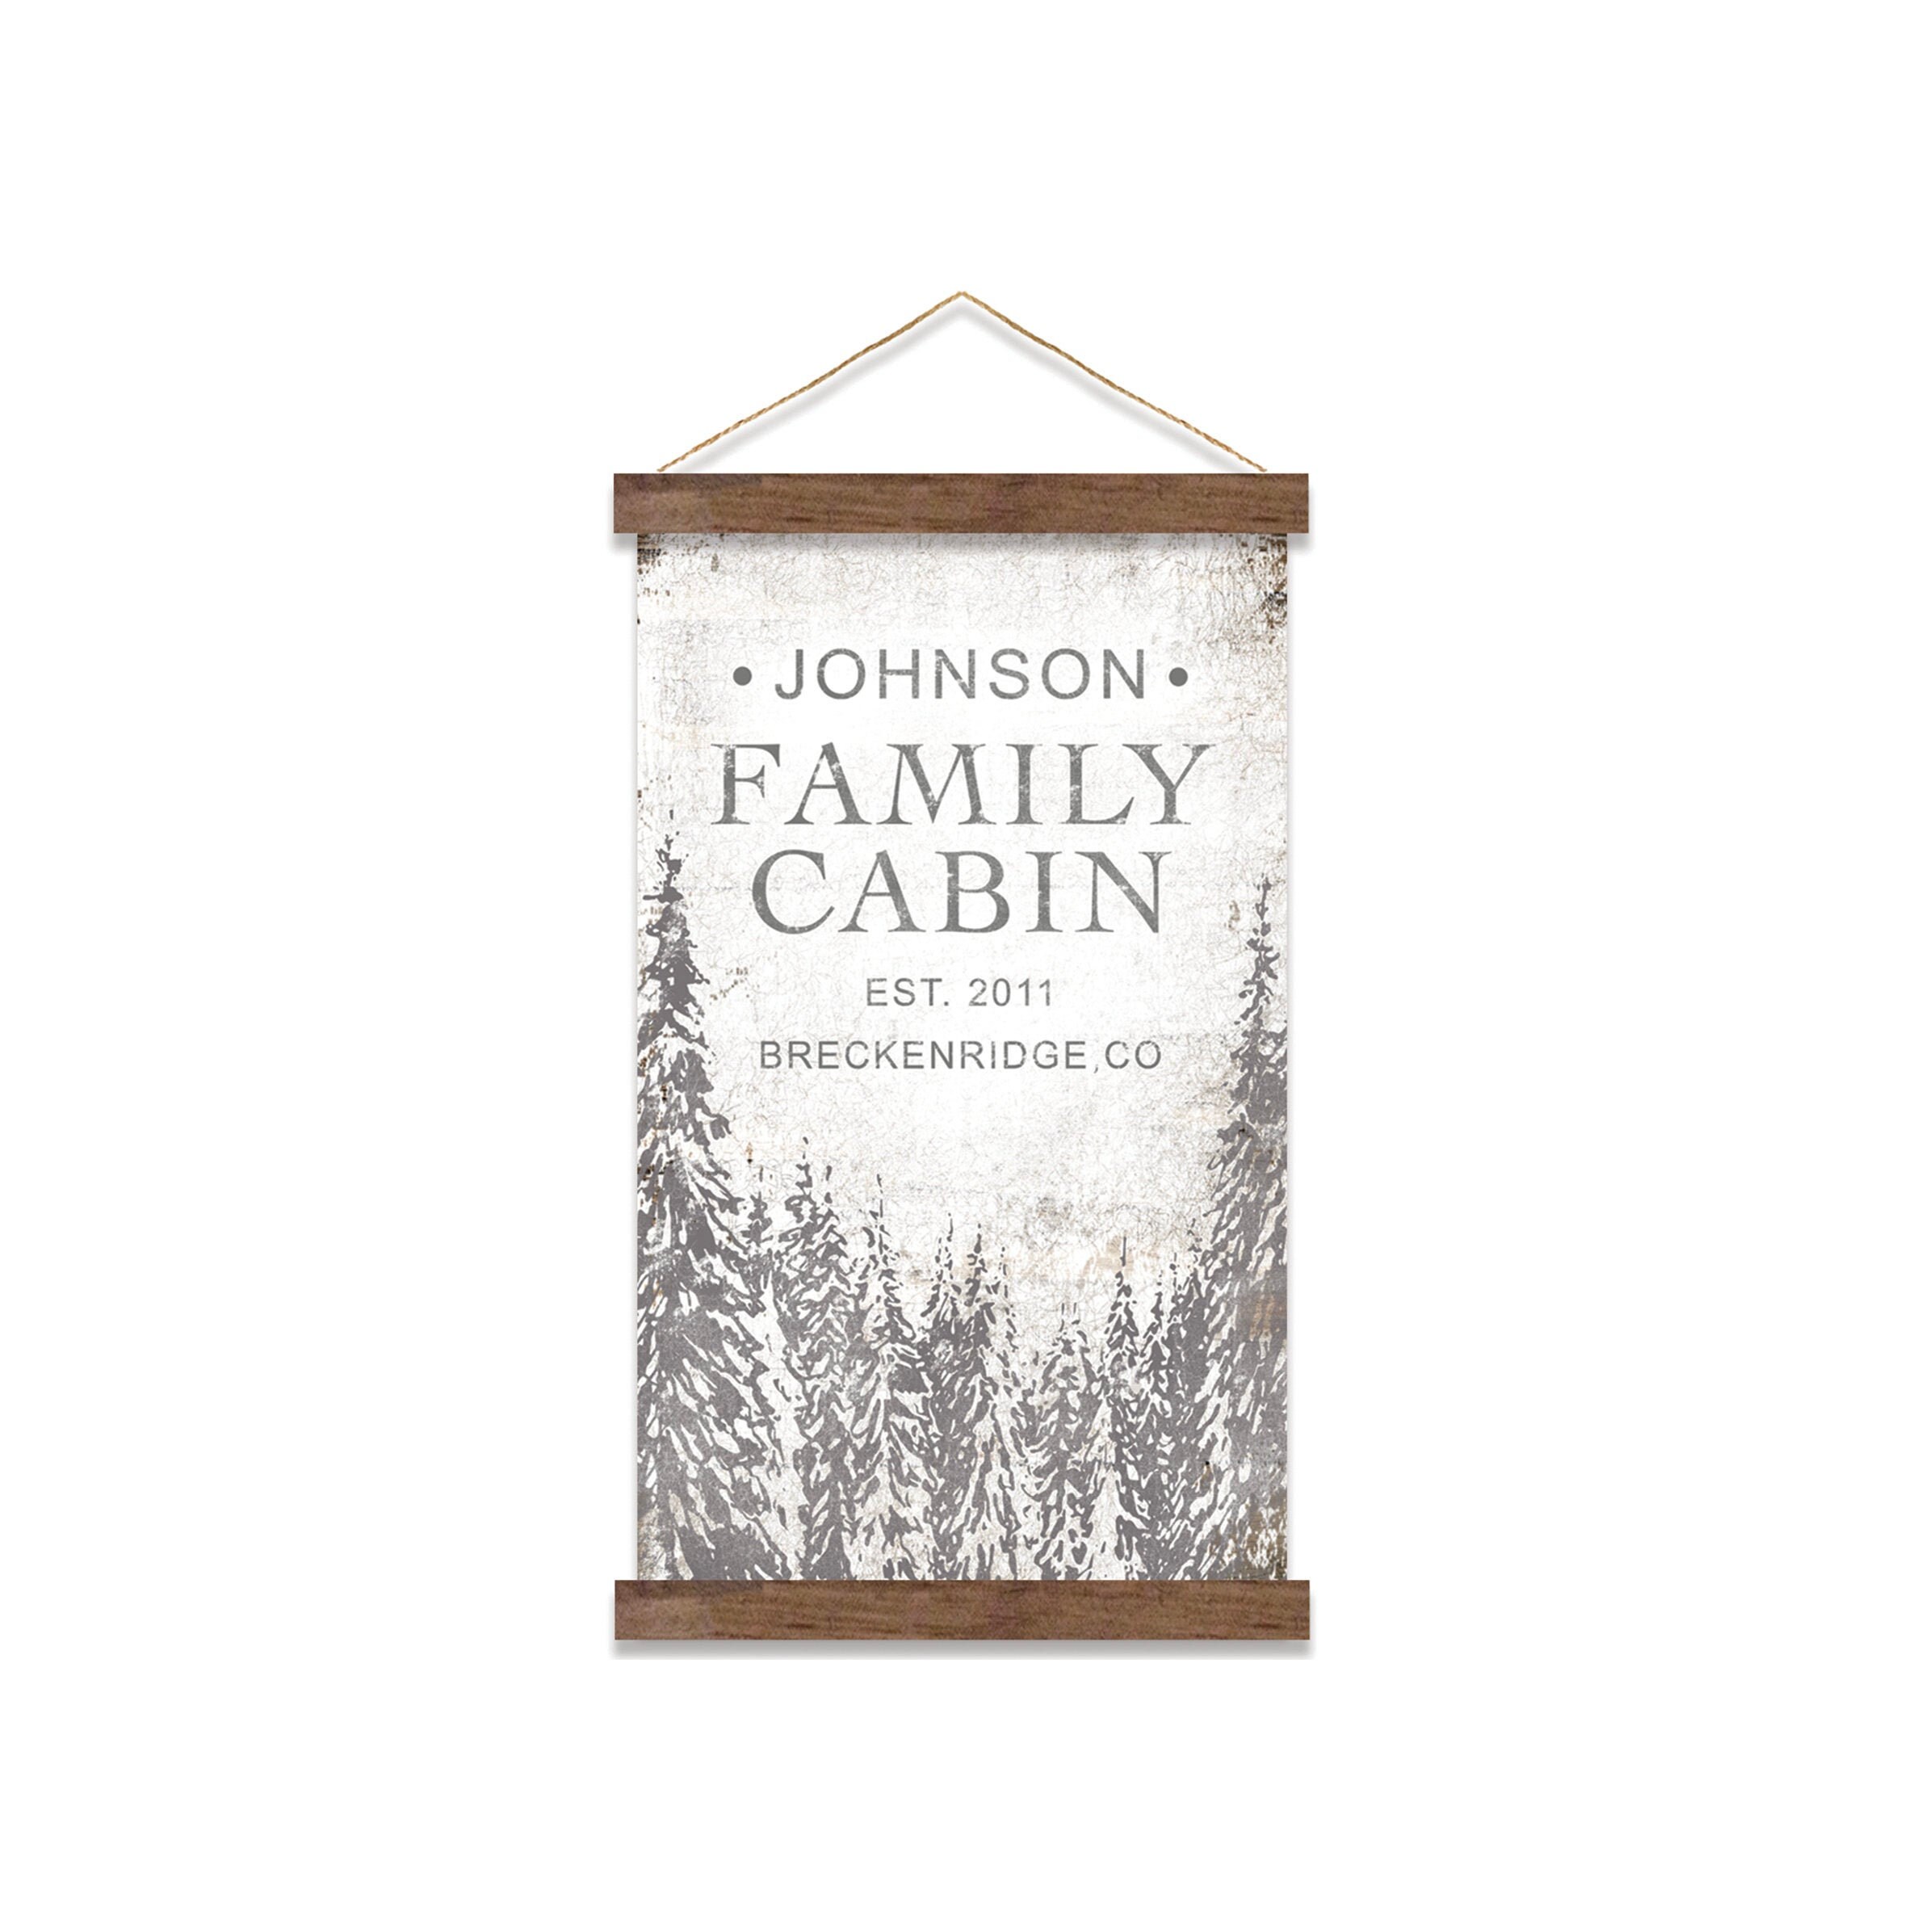 Personalized canvas wall hanging Personalized cabin signs | Etsy